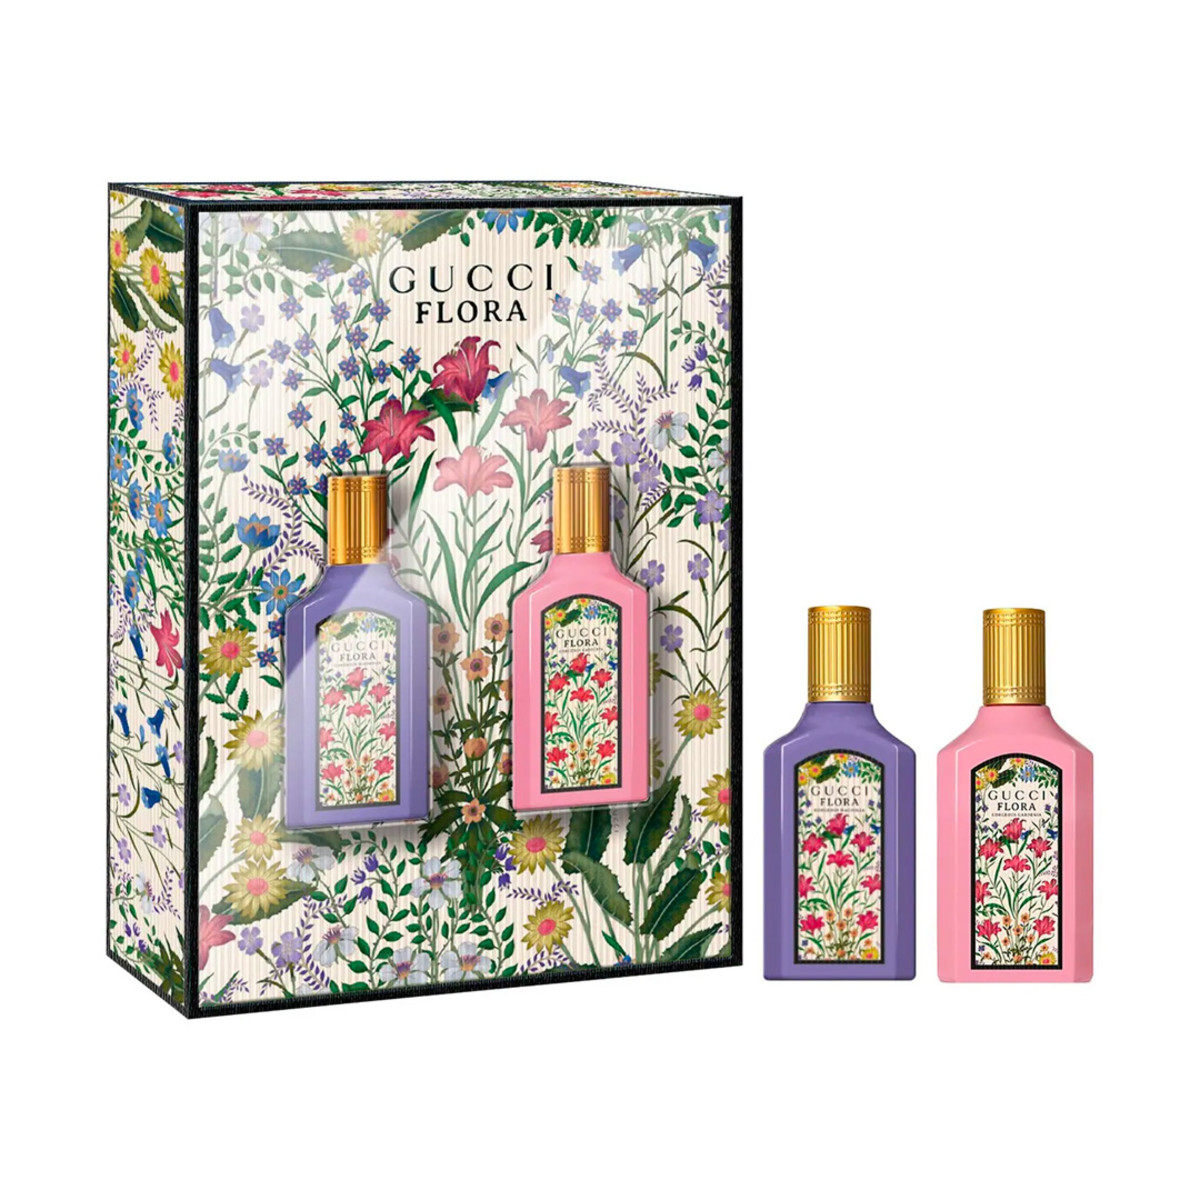 One of the best perfume gift sets for women who love all things beauty, the Gucci Mini Gorgeous Gardenia and Gorgeous Magnolia Perfume Set available now at Sephora